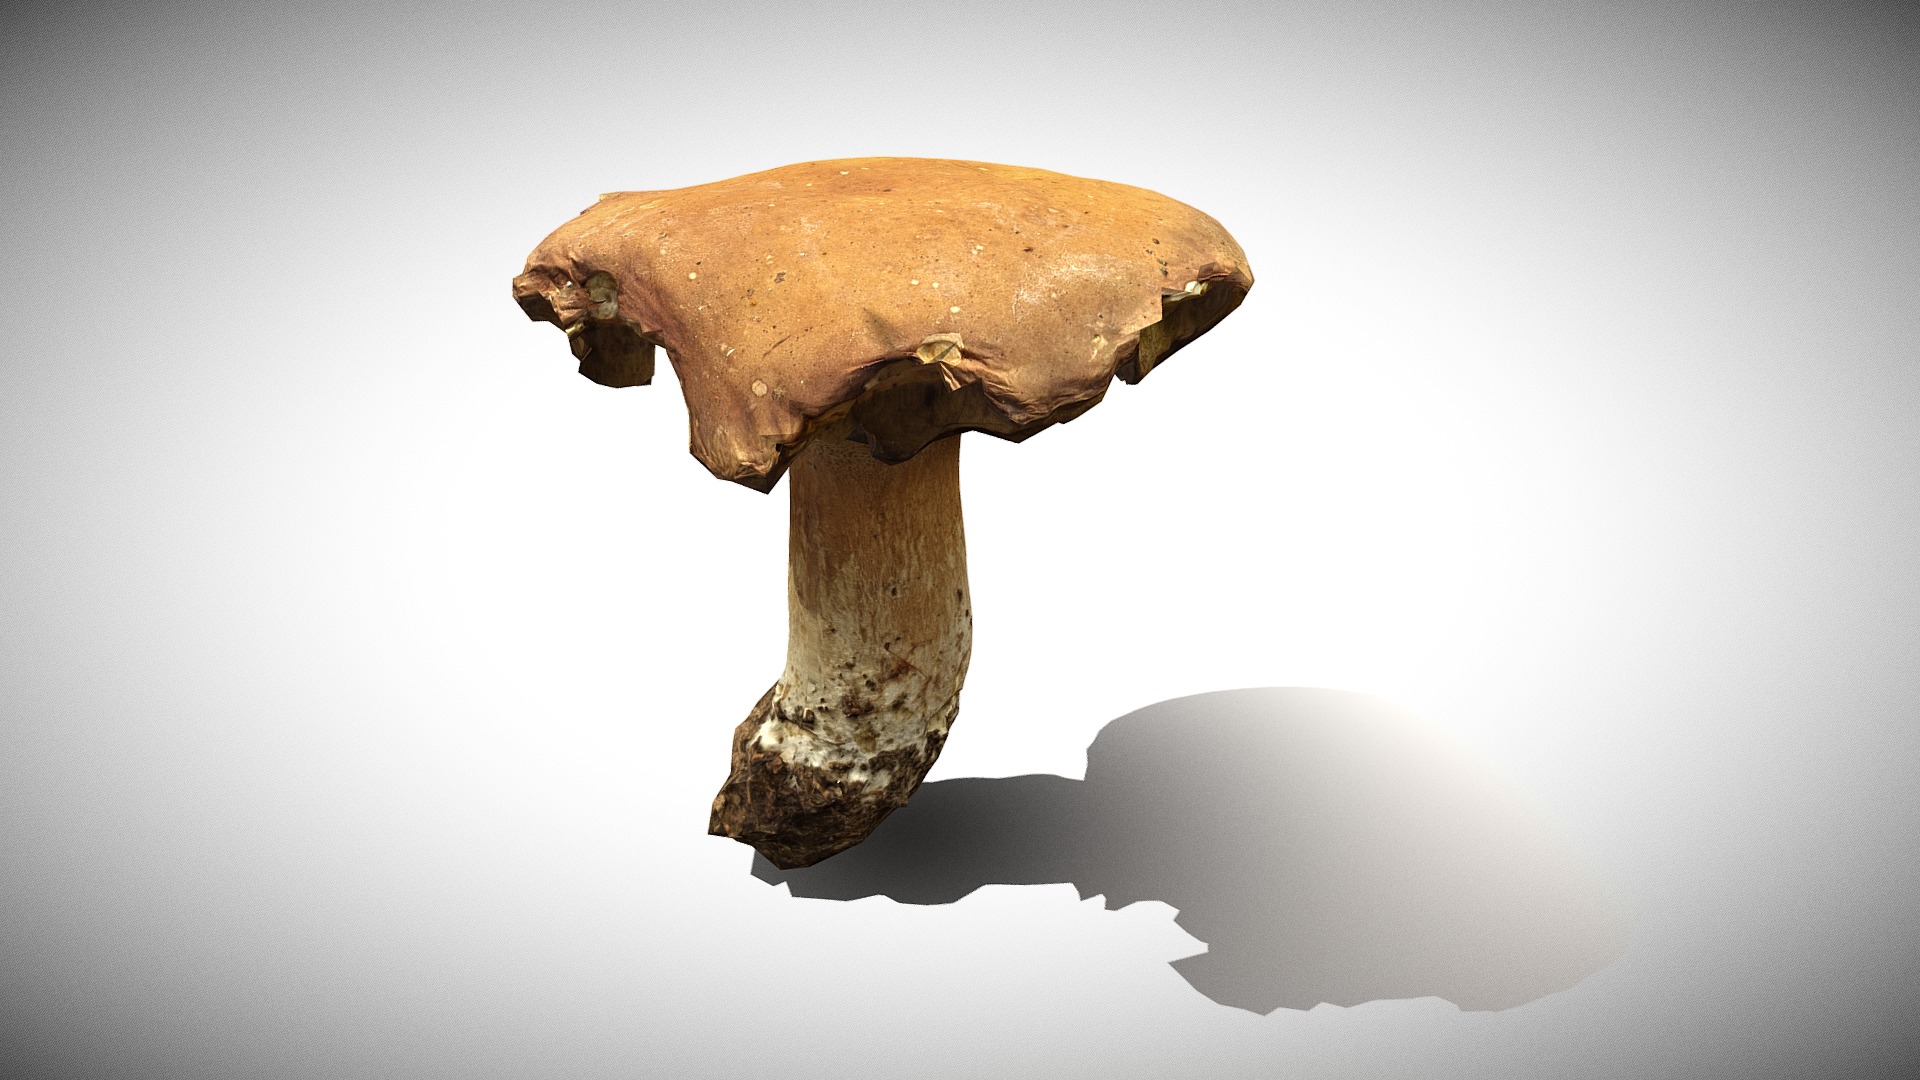 3D model Photorealistic mushroom Porcini / Boletus edulis - This is a 3D model of the Photorealistic mushroom Porcini / Boletus edulis. The 3D model is about a mushroom with a white background.